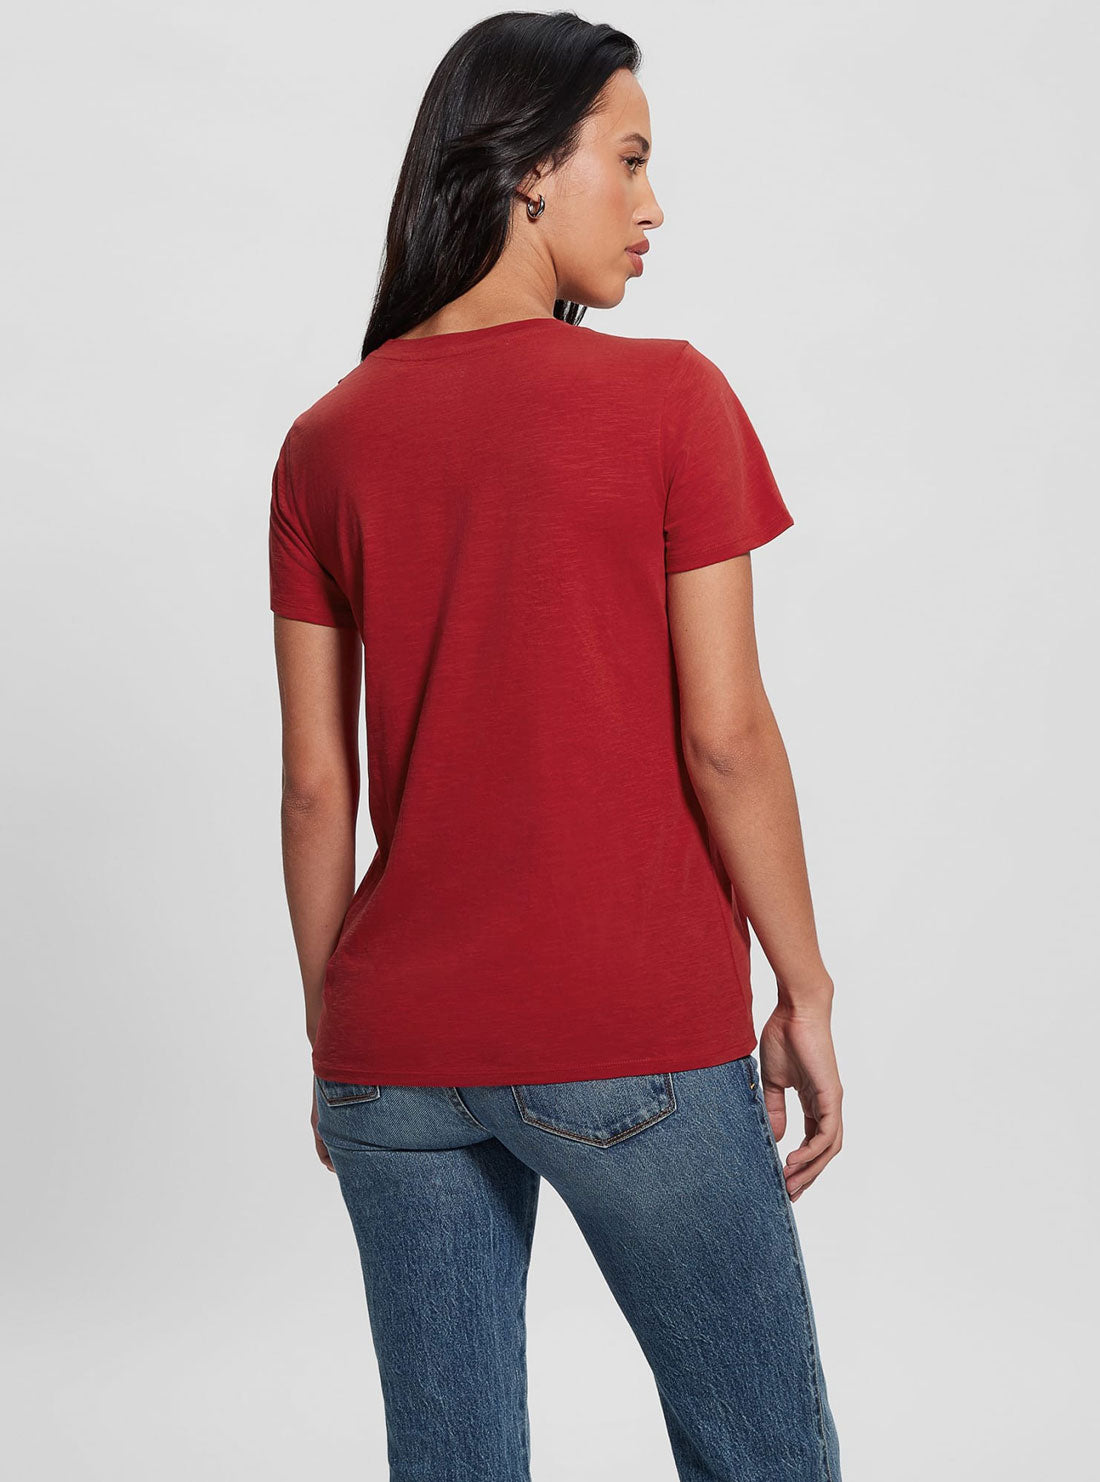 Eco Red 1981 Crystal logo T-Shirt | GUESS Women's Apparel | back view